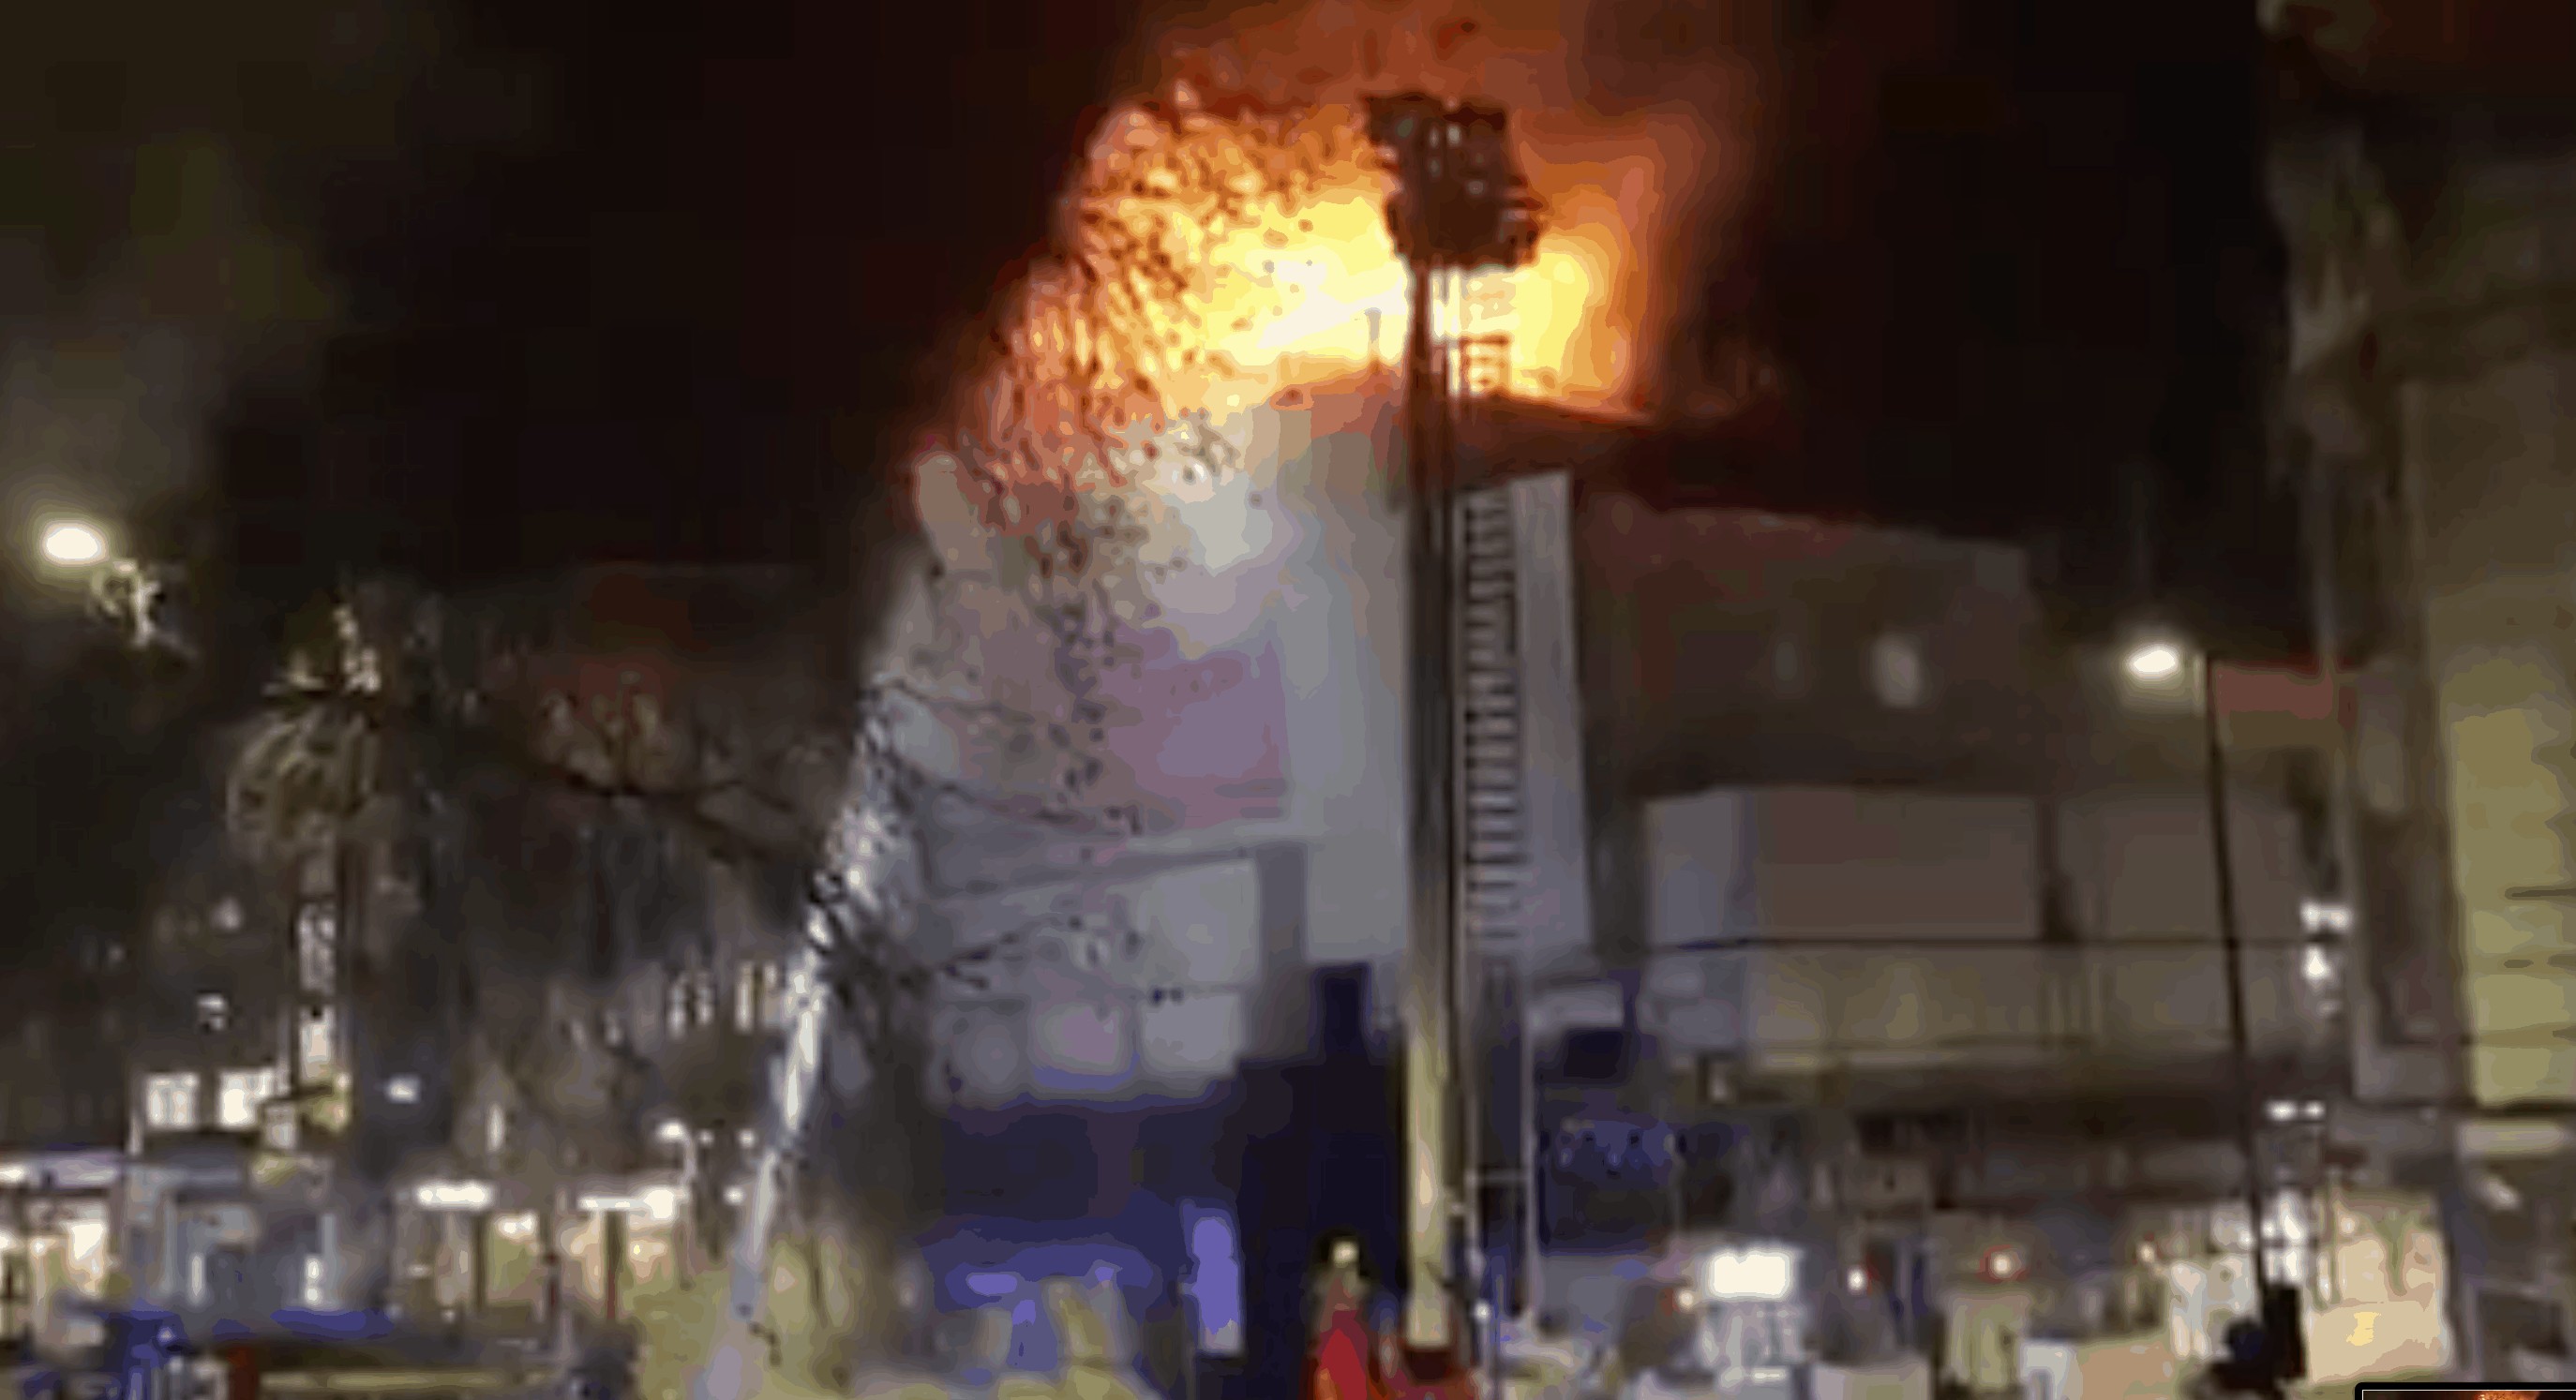 Firefighters tackle blaze at iconic nightclub which hosted Madonna, Prince and legendary club nights